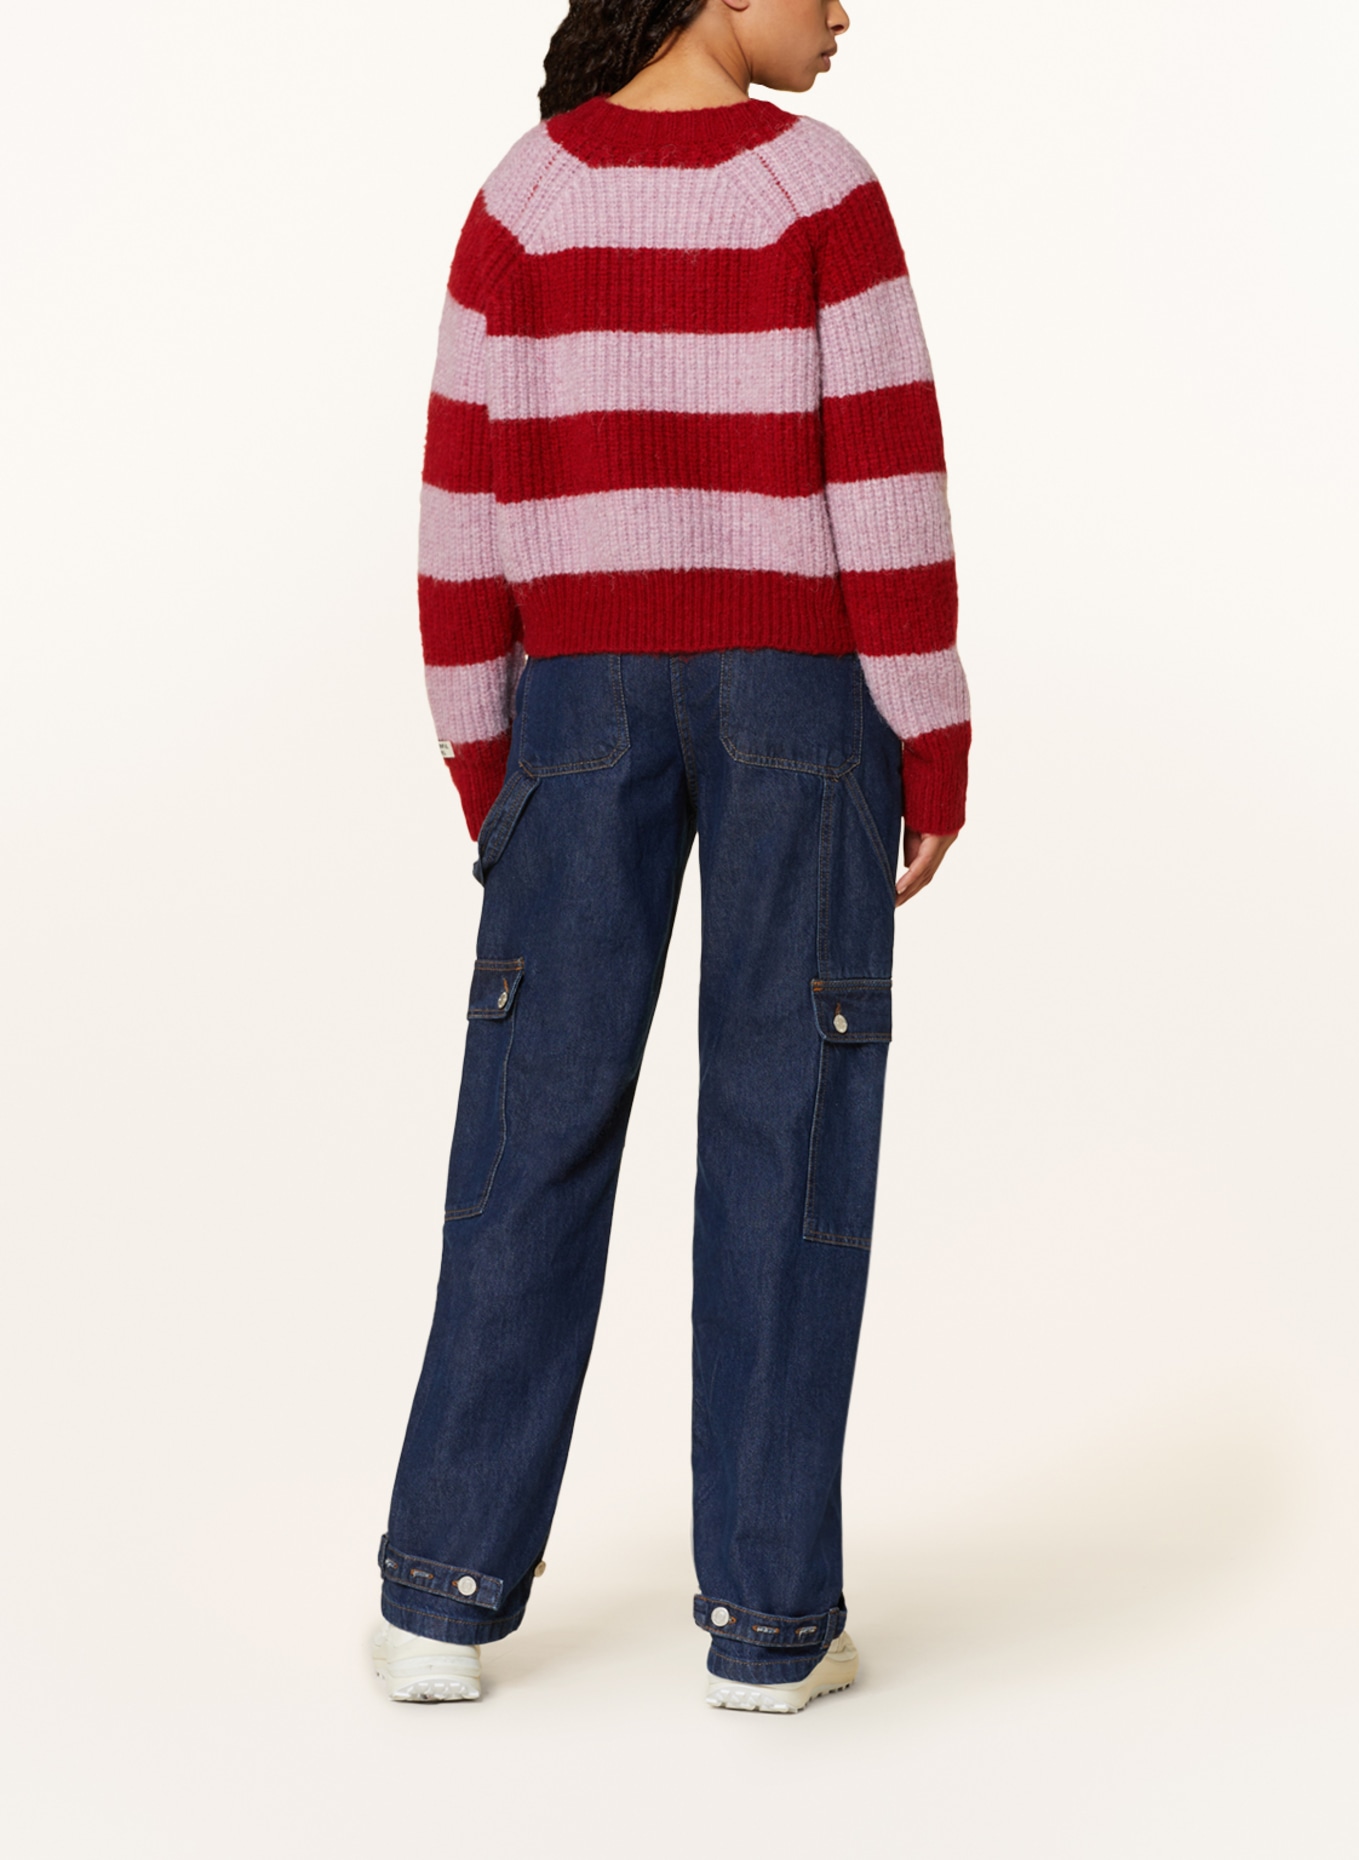 COLOURFUL REBEL Sweater, Color: DARK RED/ PINK (Image 3)